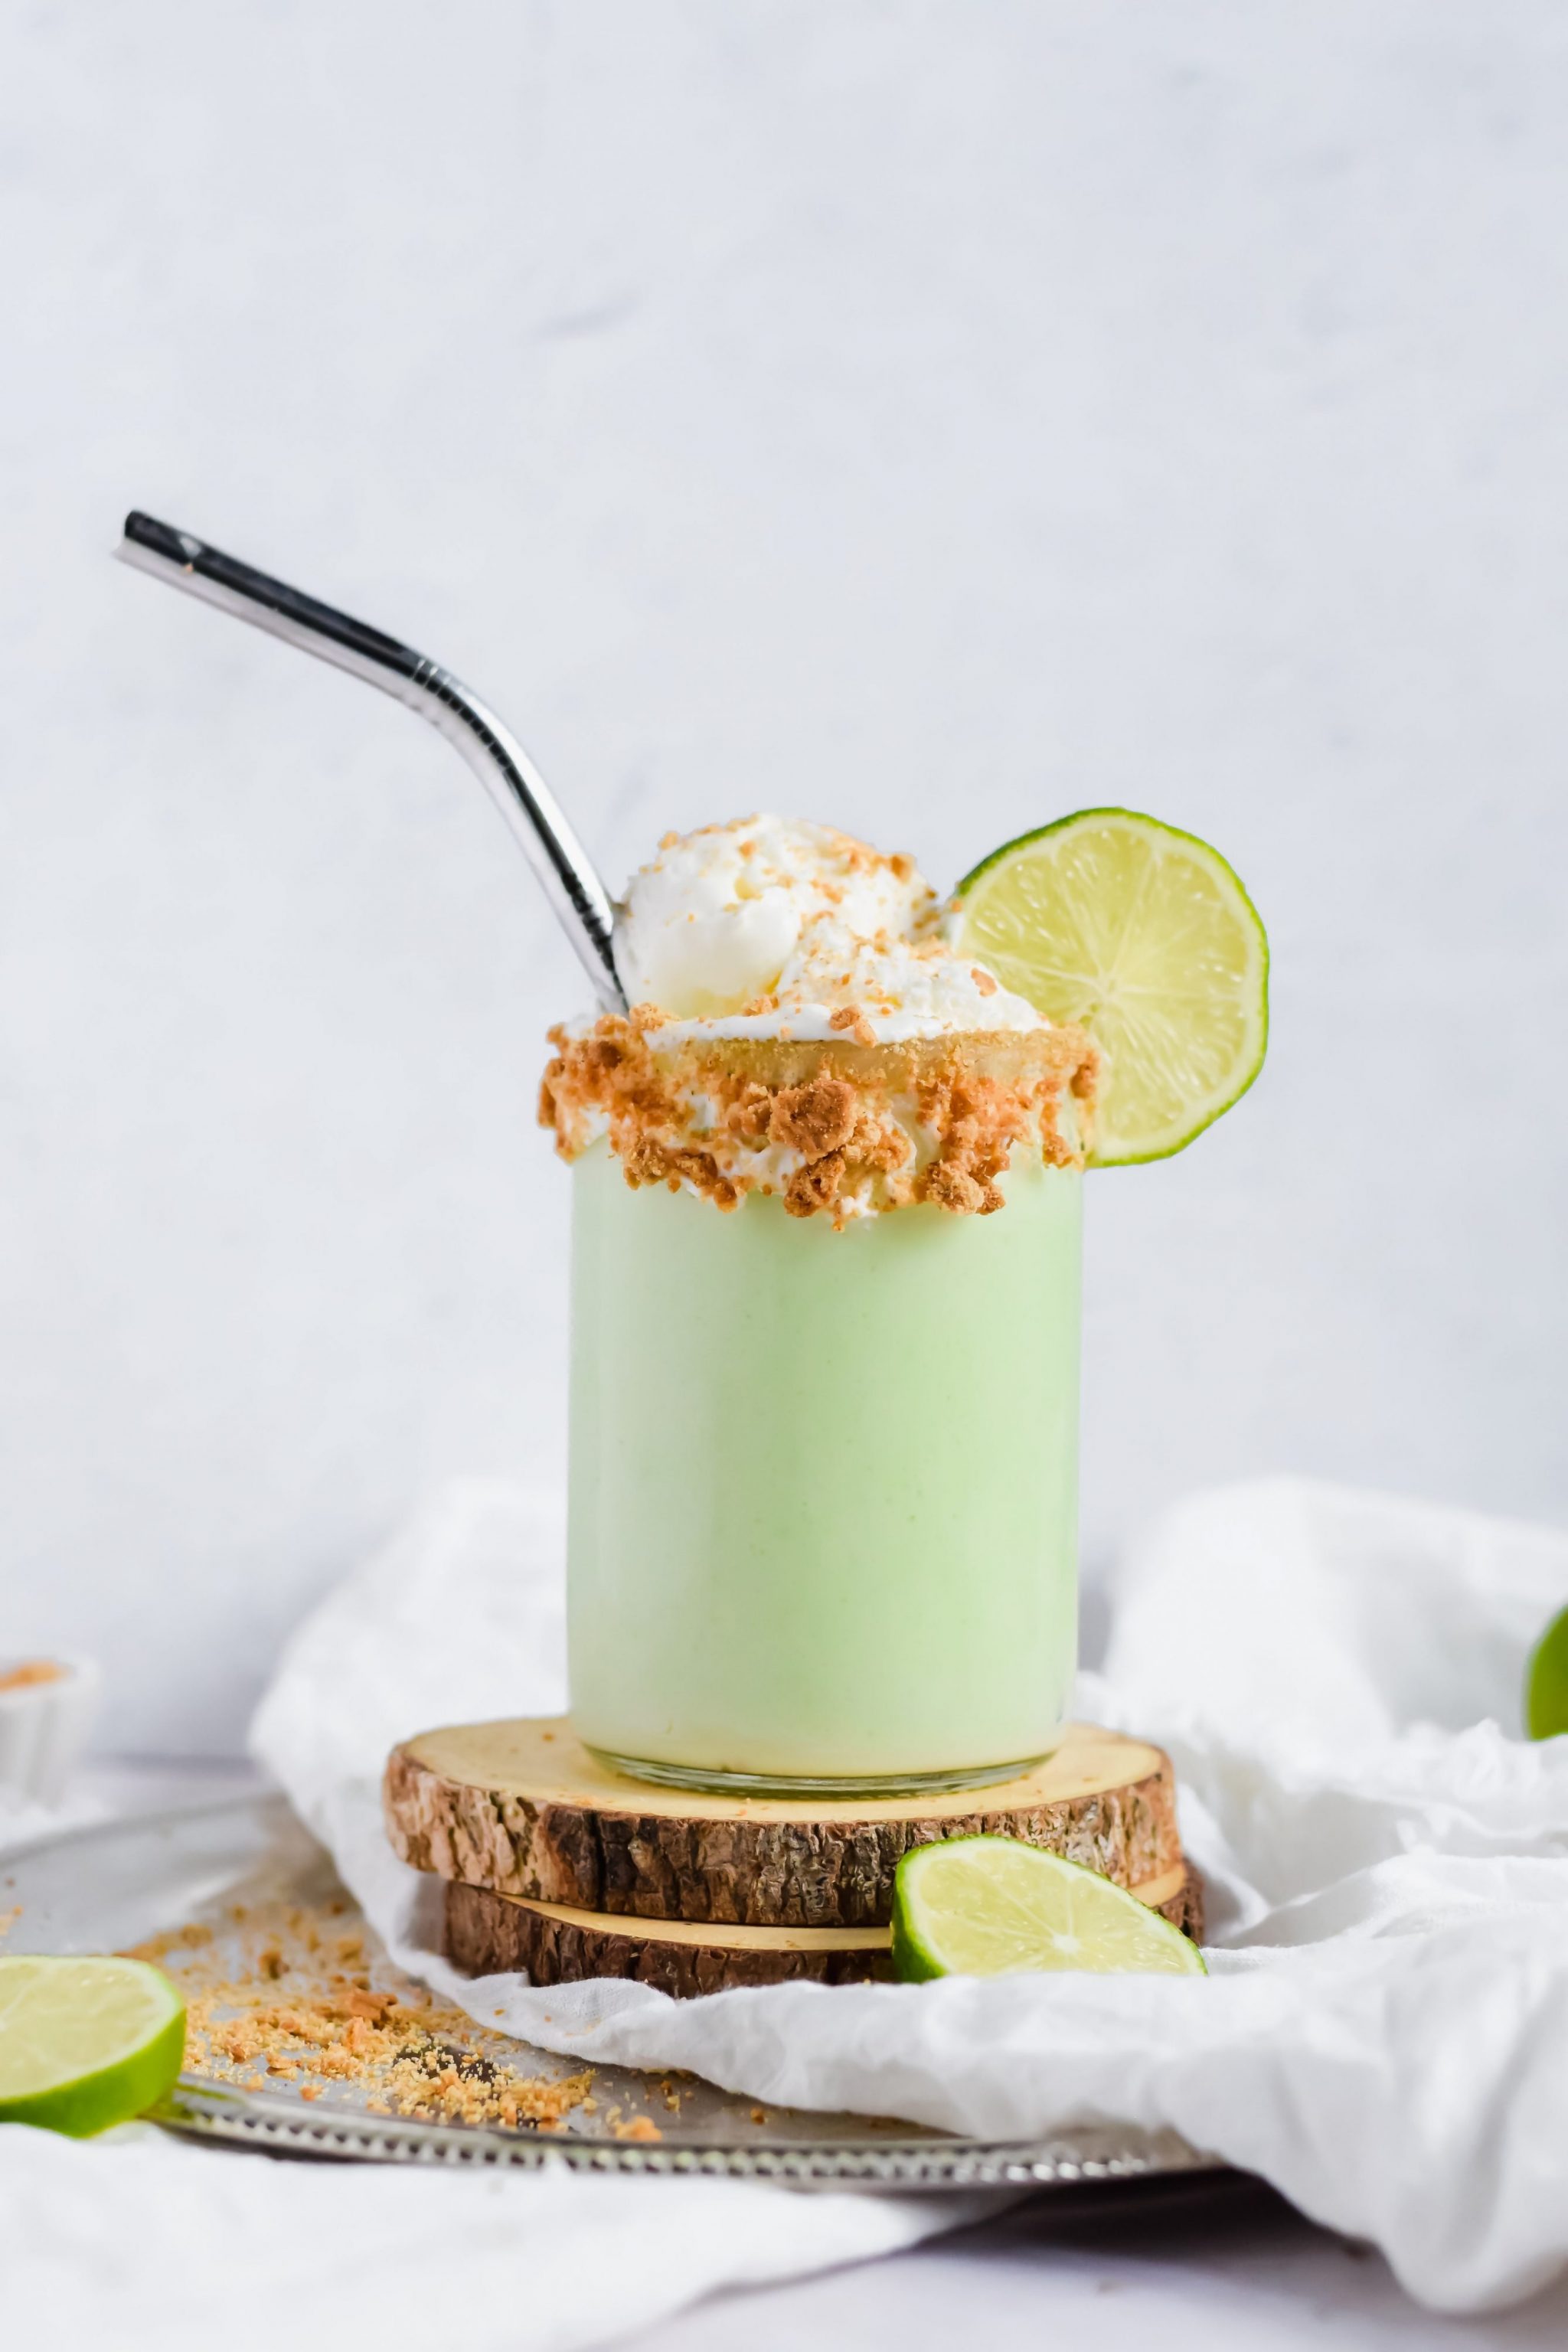 Key Lime Pie Milkshake topped with Cool Whip, crumbled graham cracker and a slice of lime with a metal straw